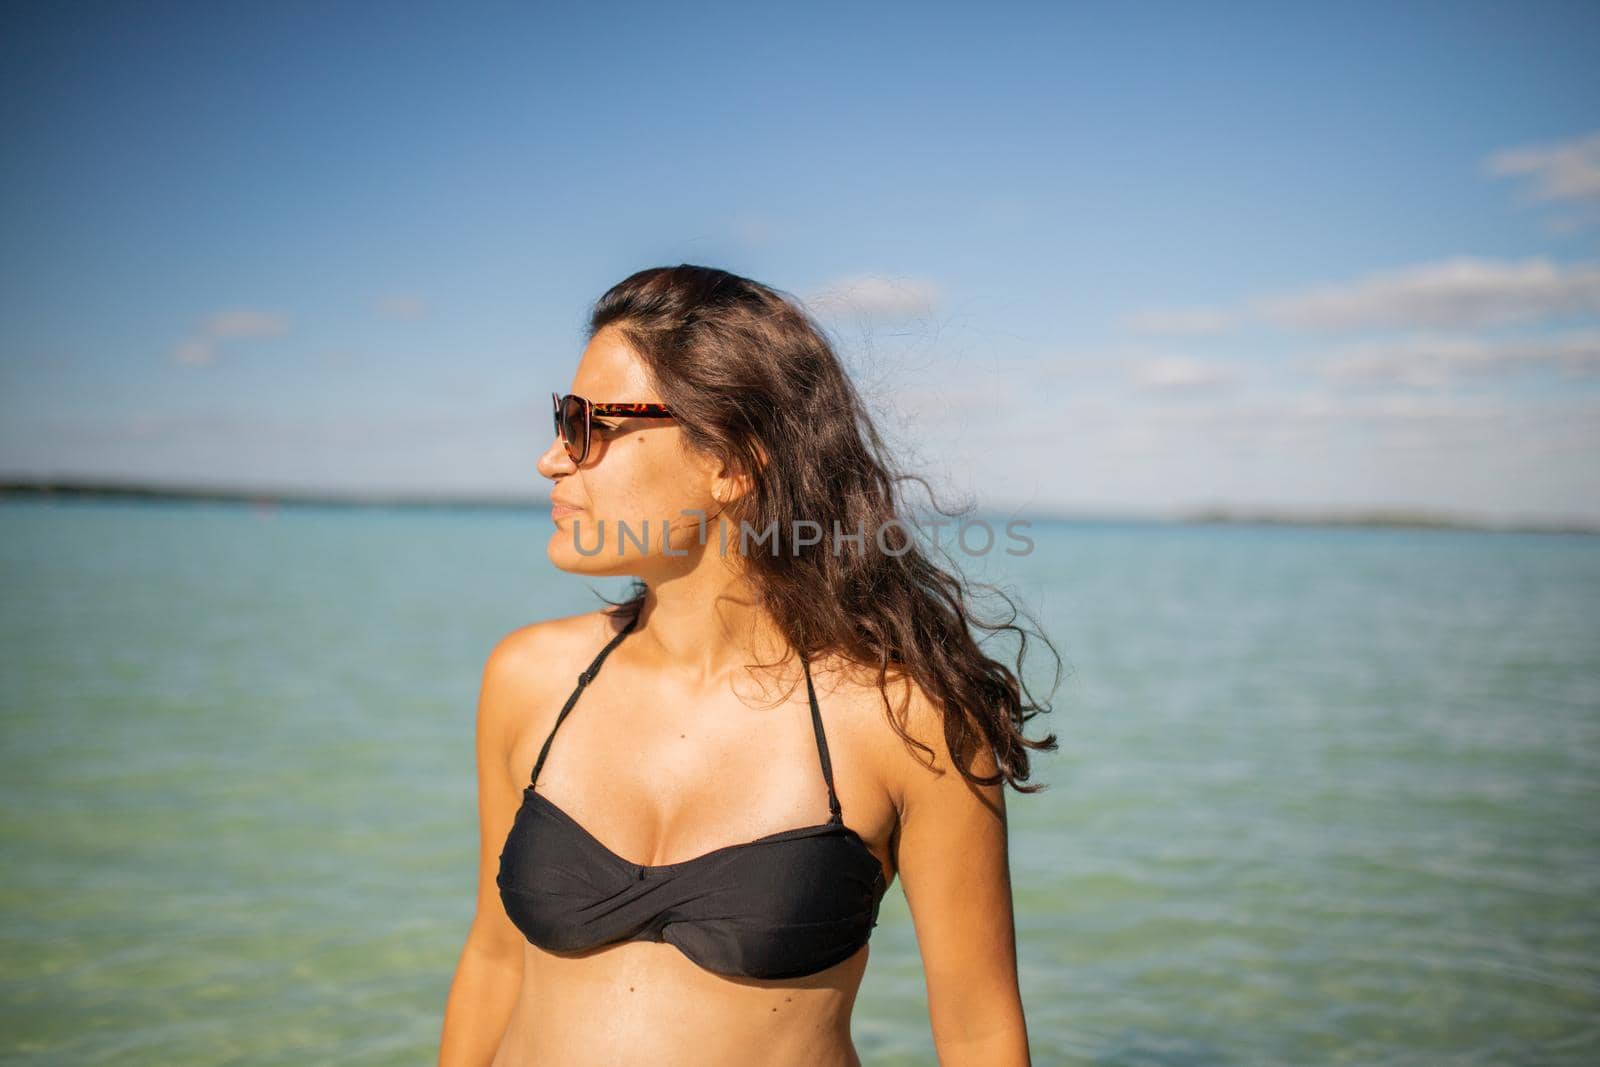 Beautiful brunette woman standing with blue sea and sky as background. Attractive woman wearing sunglasses and smiling serenely on beach. Tropical summer vacations